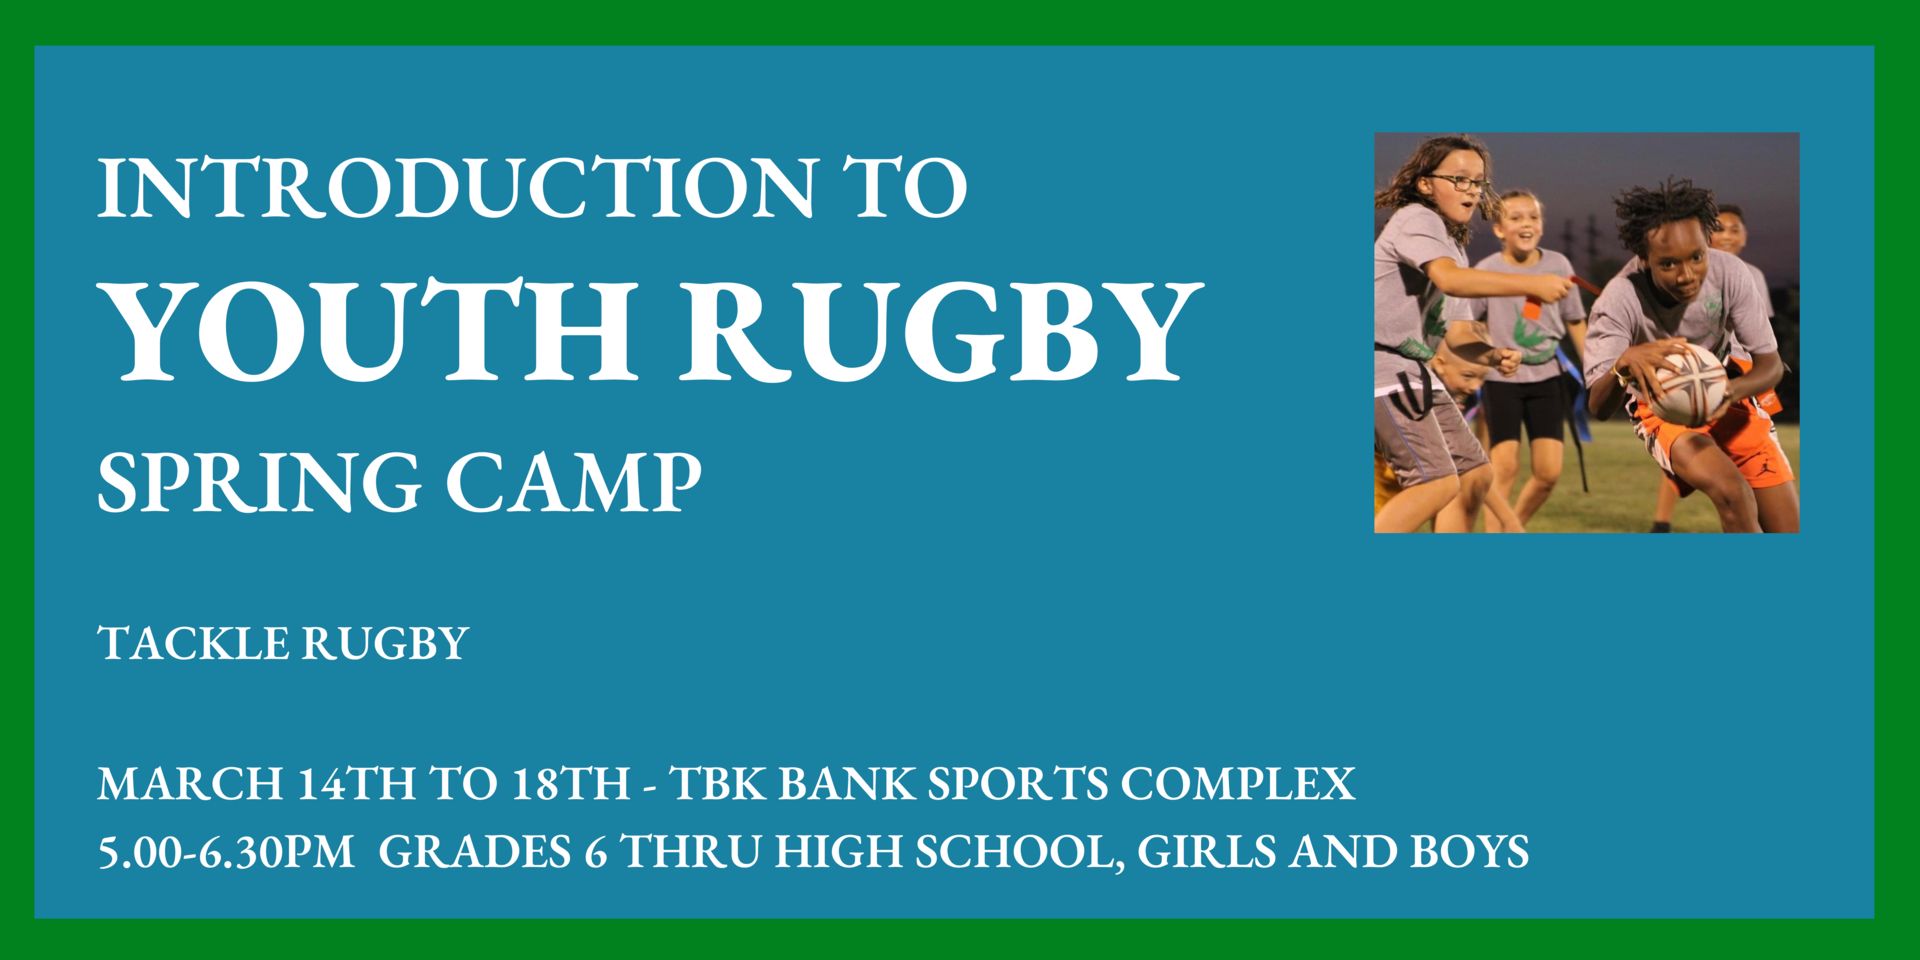 Youth Rugby Spring Camp, Bettendorf, Iowa, United States